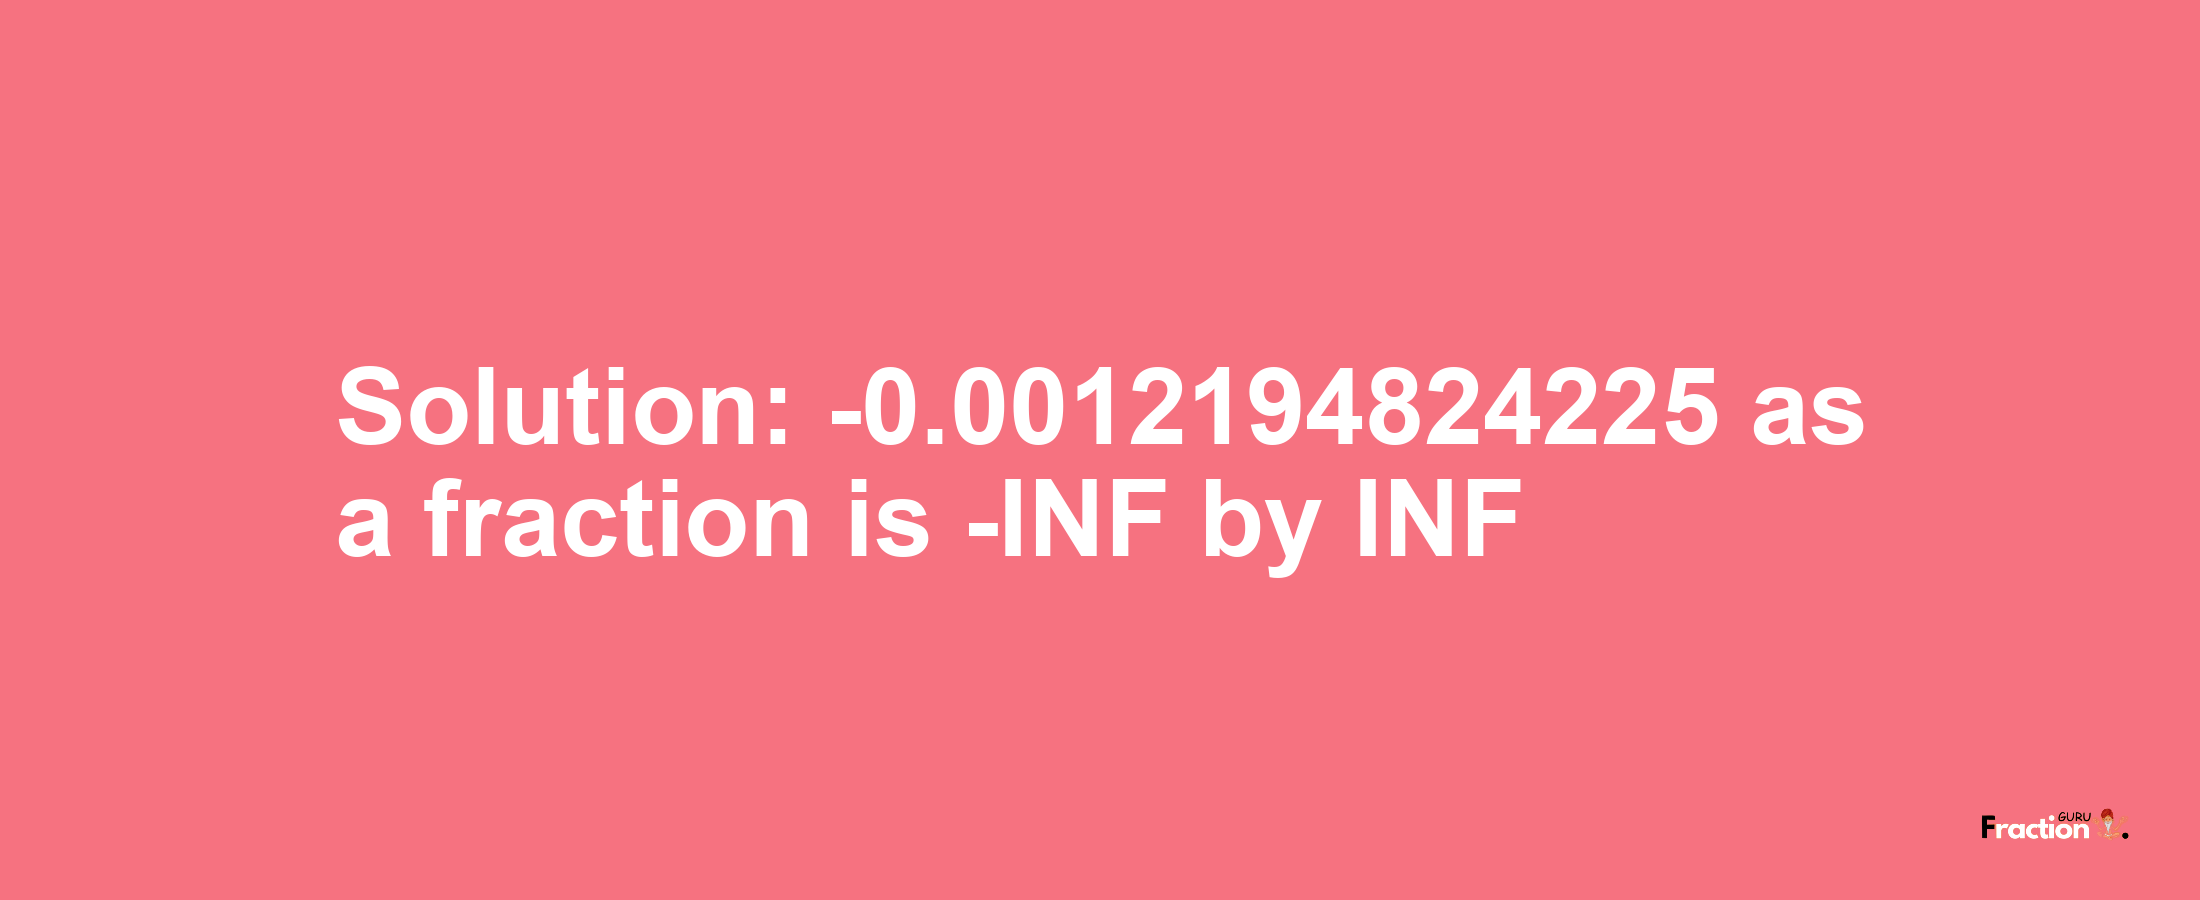 Solution:-0.0012194824225 as a fraction is -INF/INF